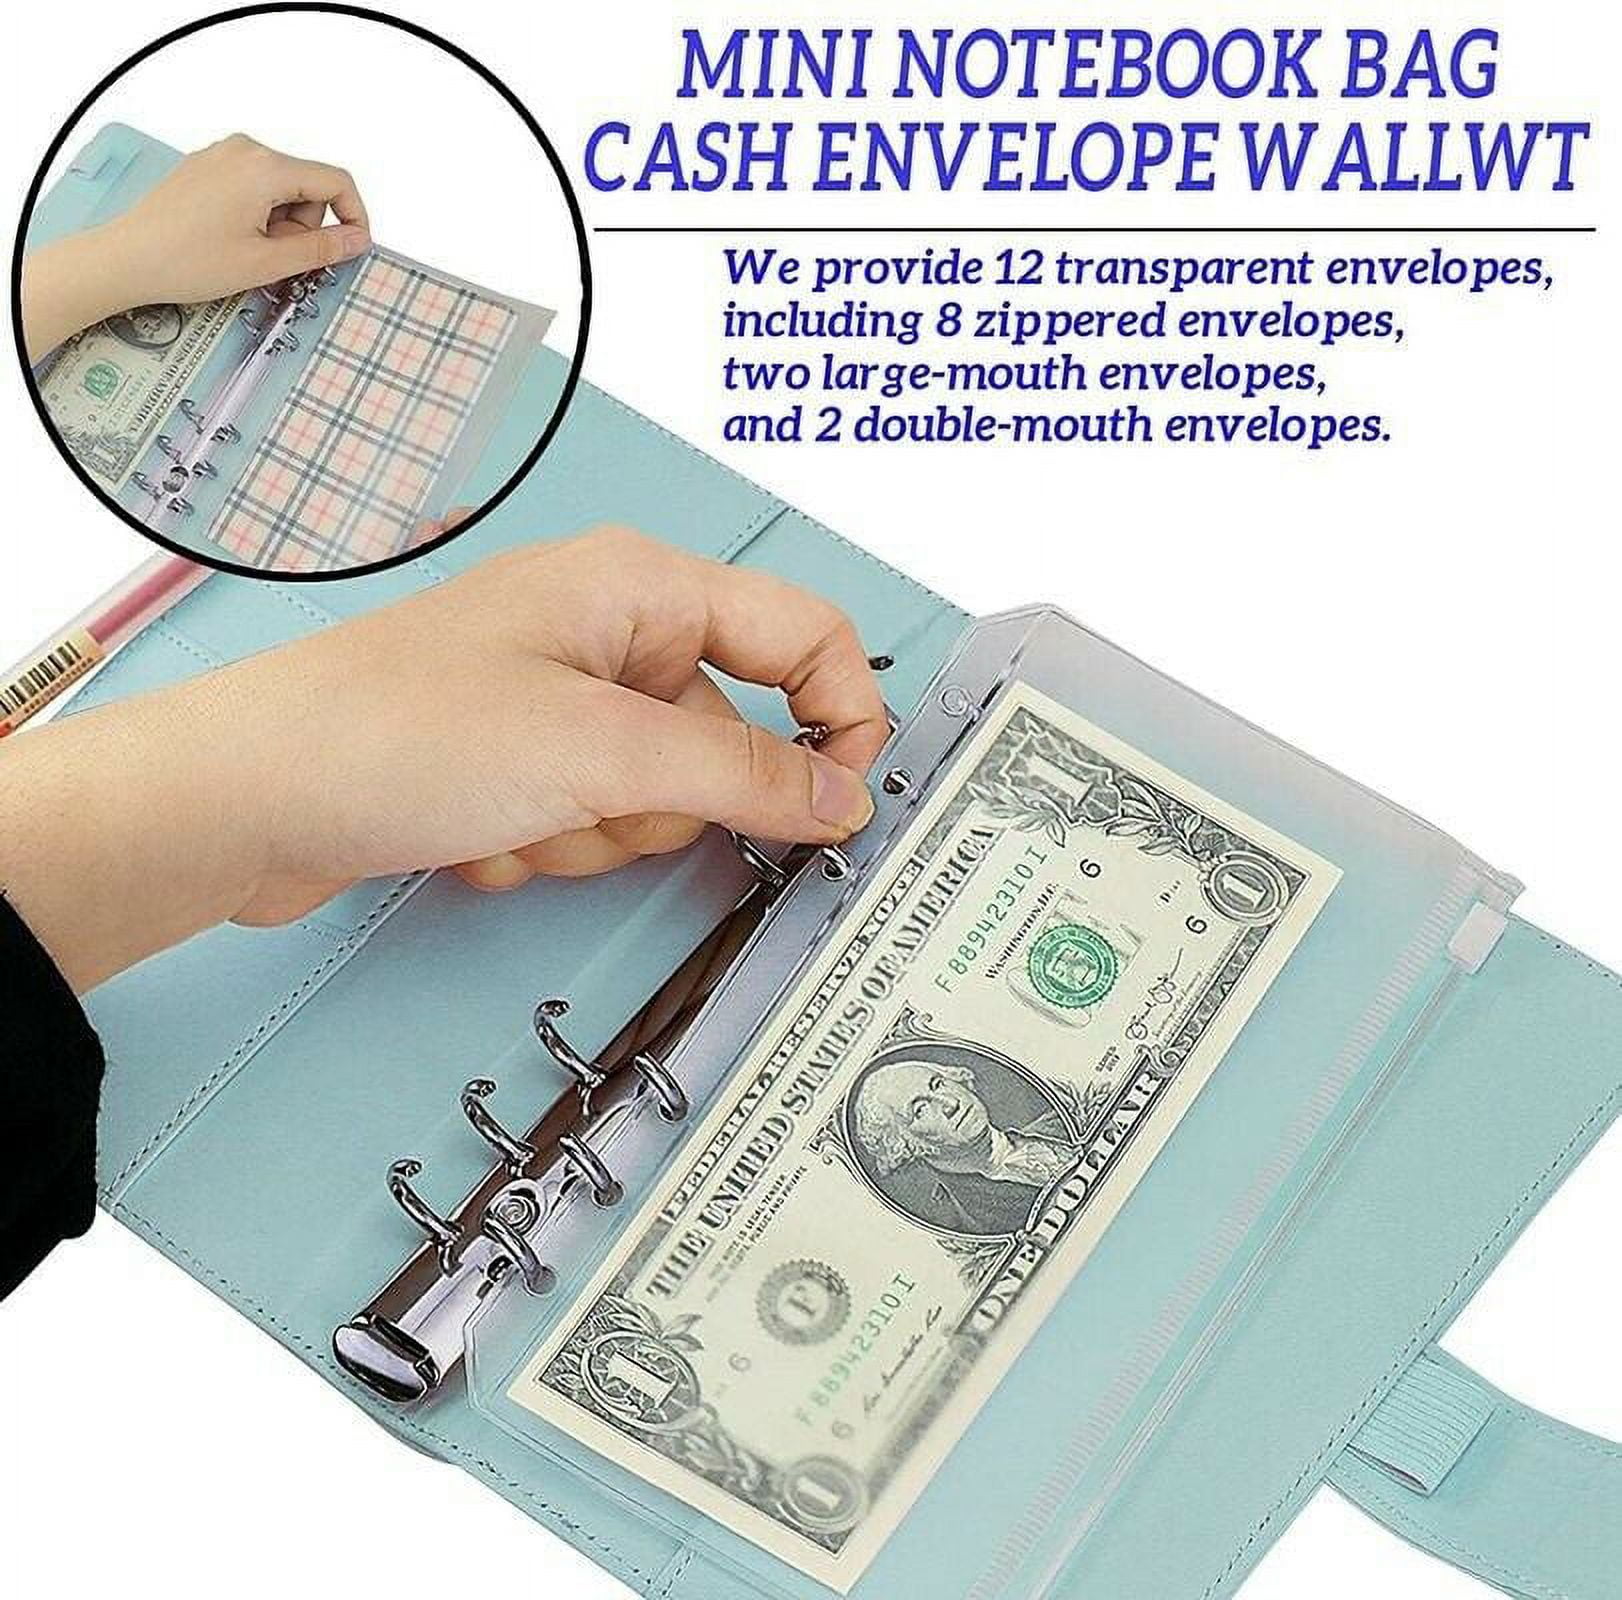 A6 White Checkered Budget Binder With Cash Envelpes  Budget Binder Cash  Money Budgeting System for Sale in Jurupa Valley, CA - OfferUp